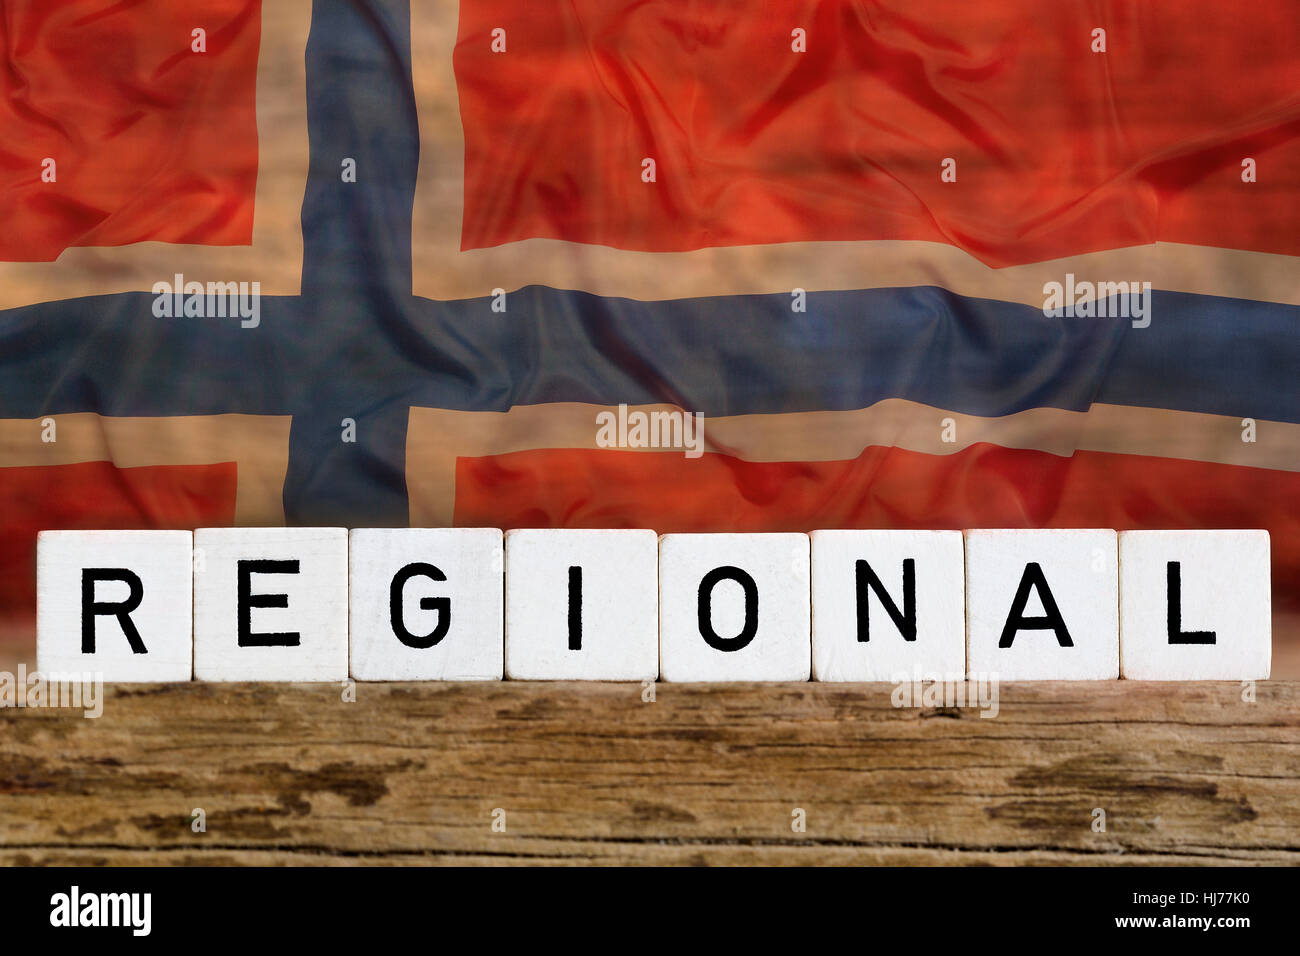 Regional concept, Norway, on wooden background Stock Photo